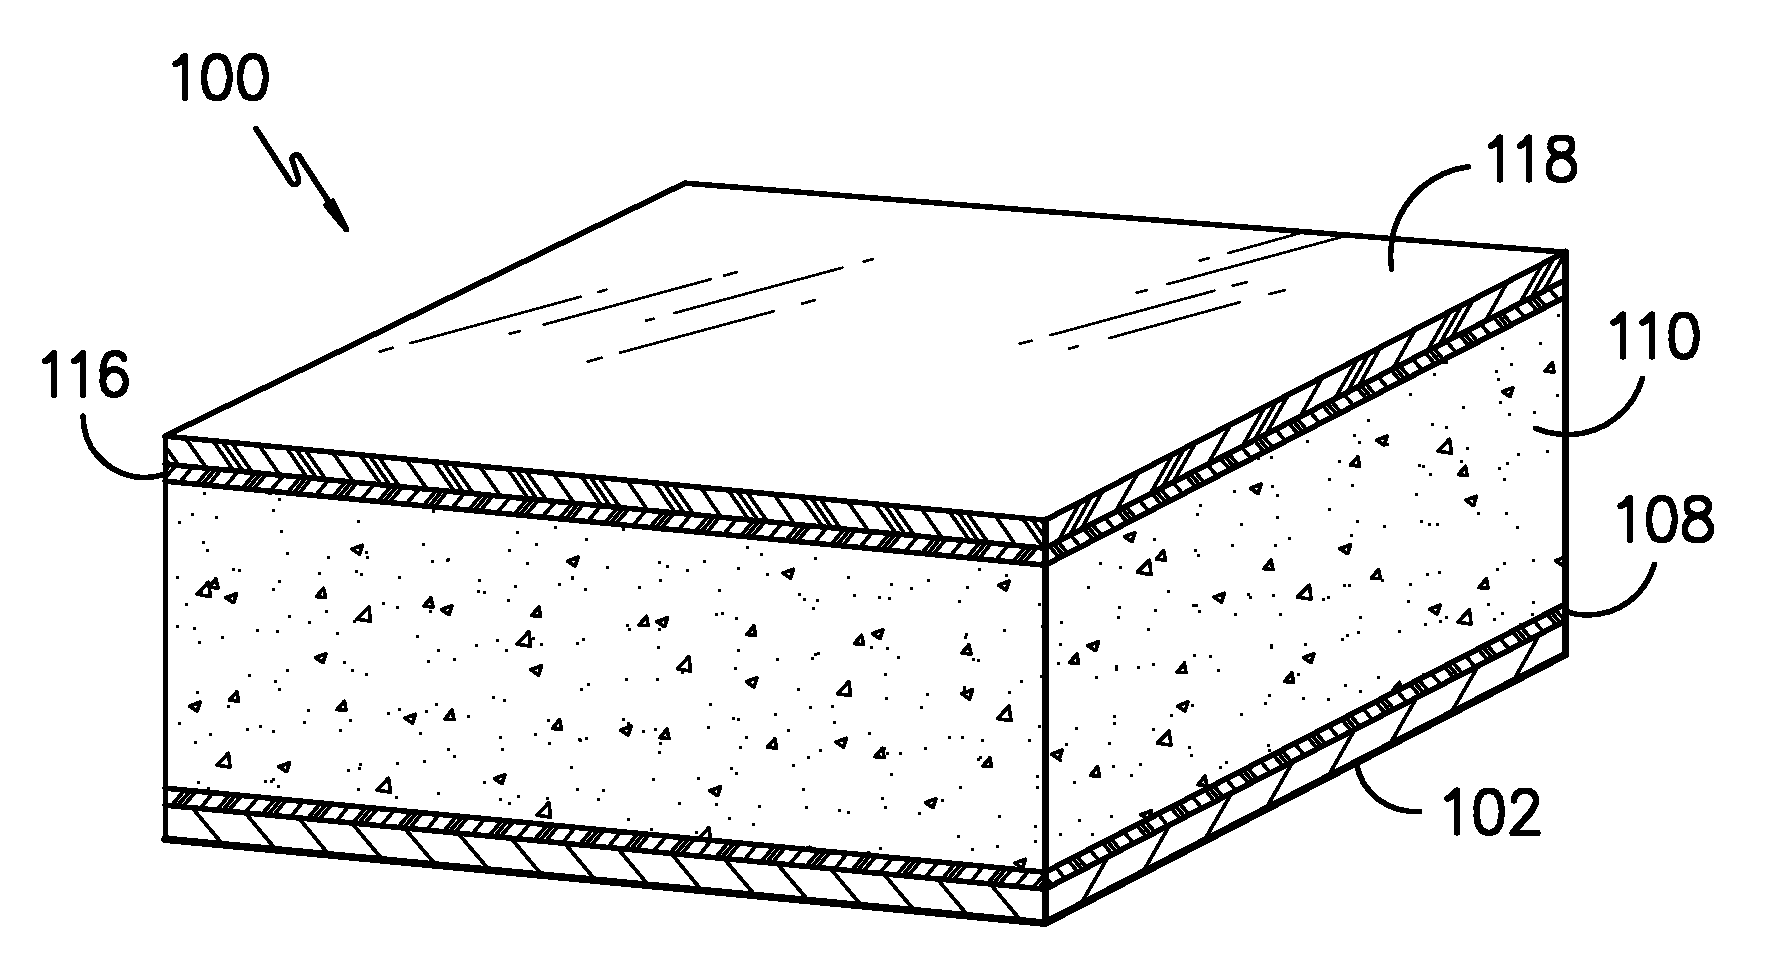 Composite article suitable for use as a wound dressing